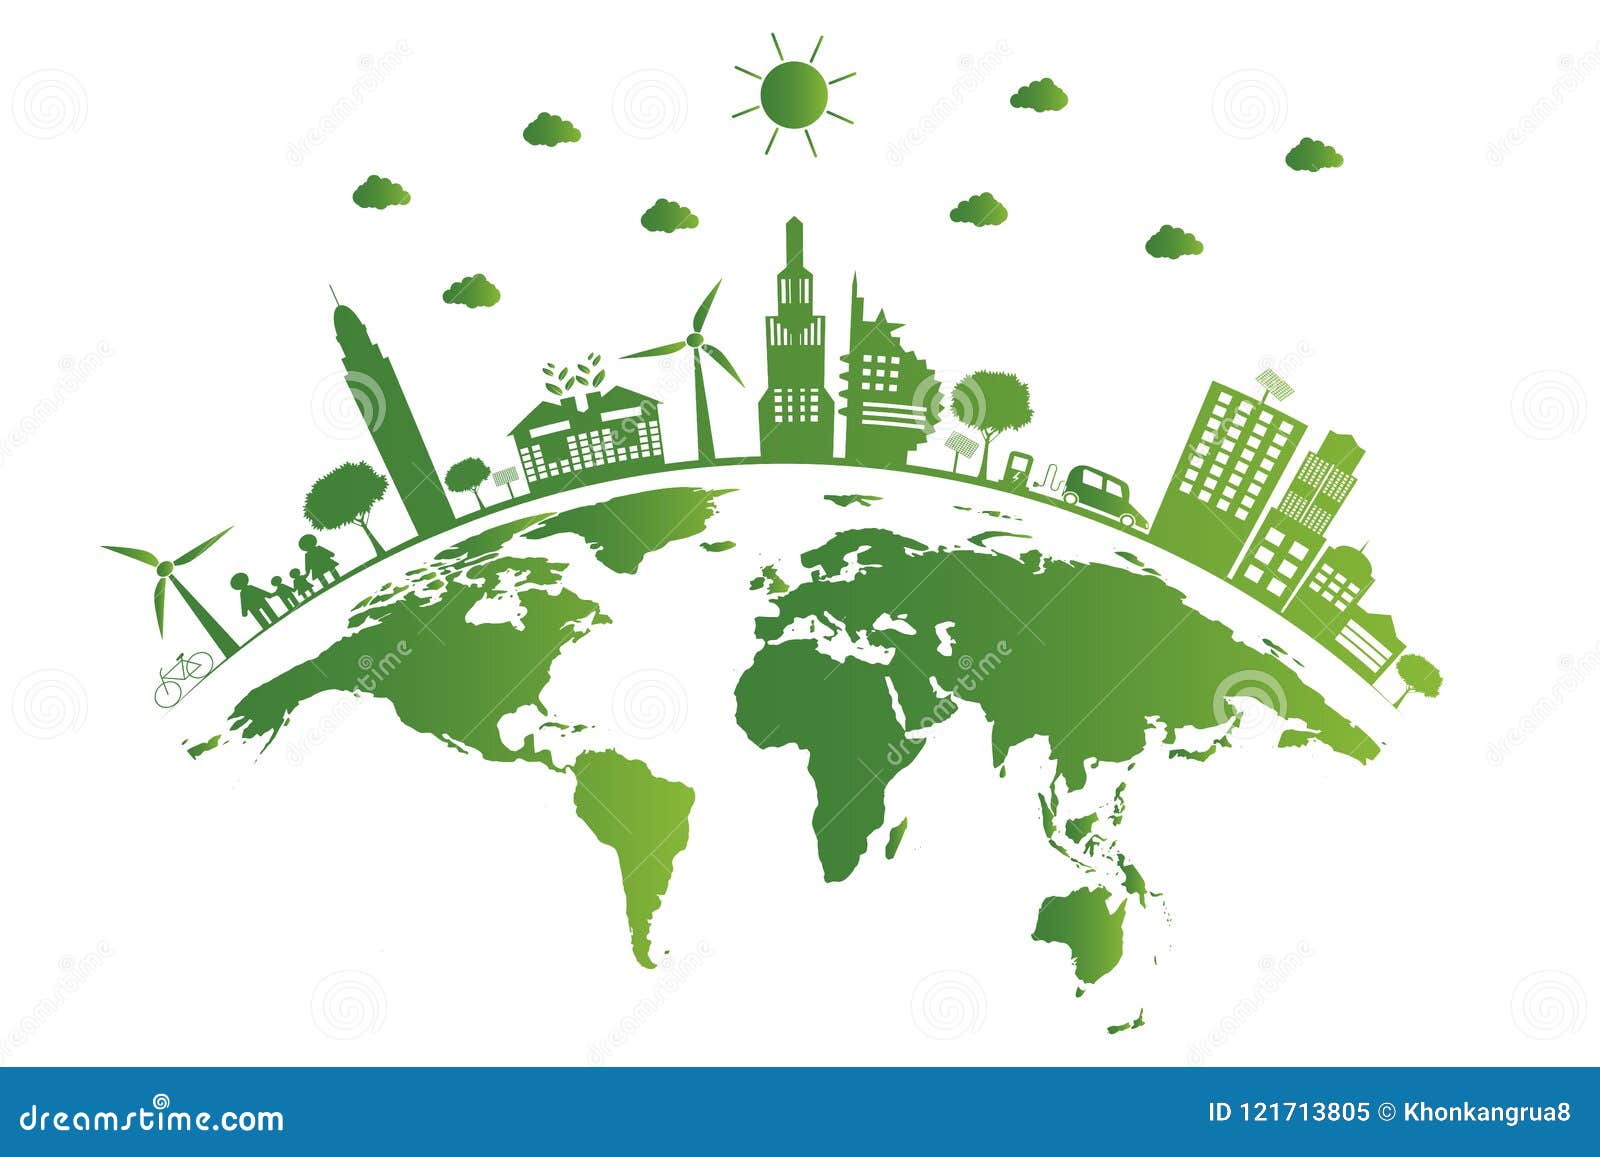 ecology.green cities help the world,earth with eco-friendly concept ideas. 